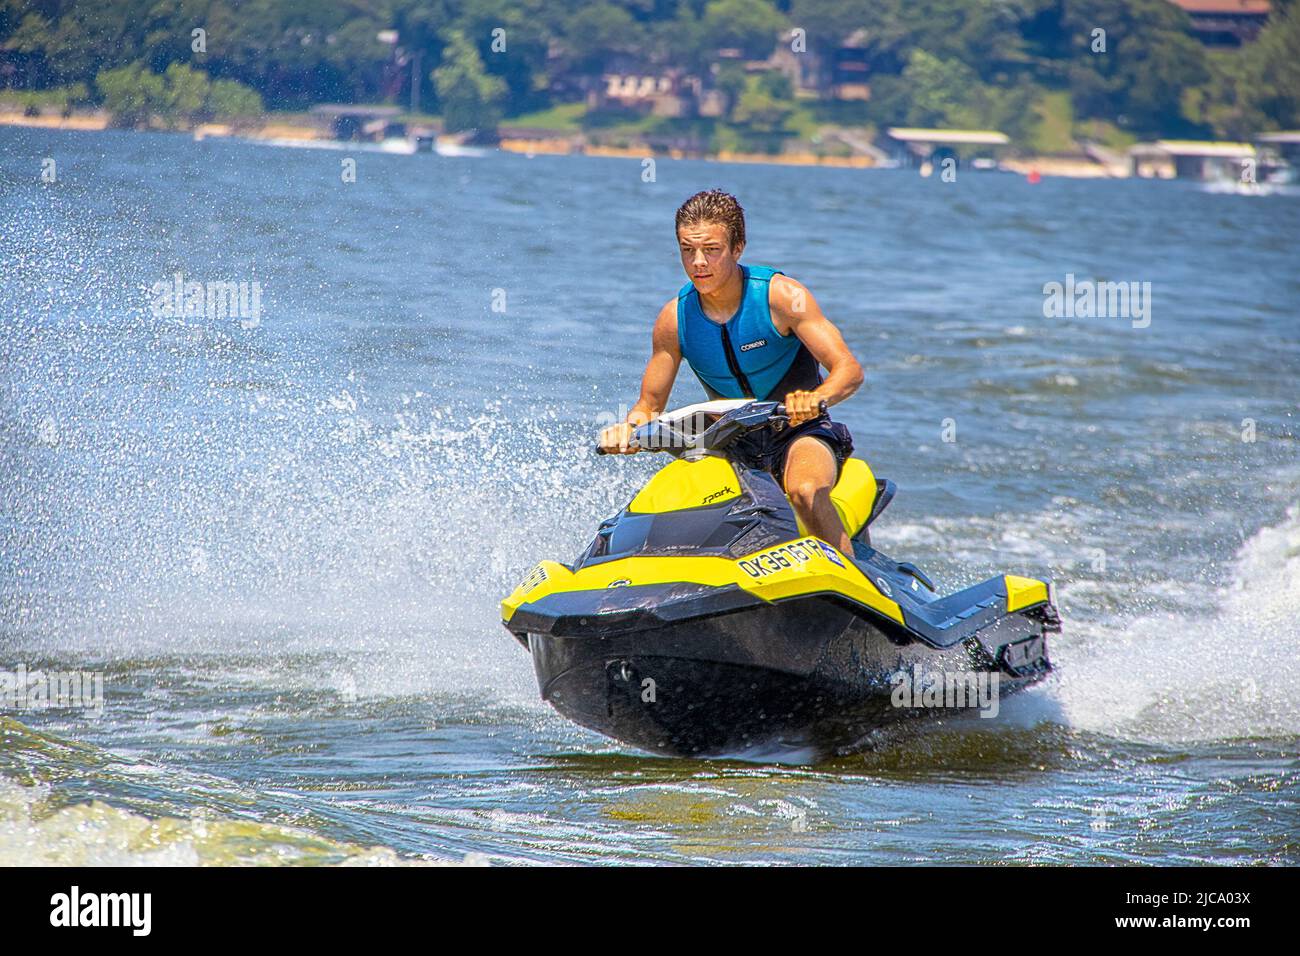 2021 - 06 -20 Grand Lake, OK USA - Attractive young man on wave runner - PWC - jet ski crouched and leaning forward as he prepares  to jump a boats wa Stock Photo